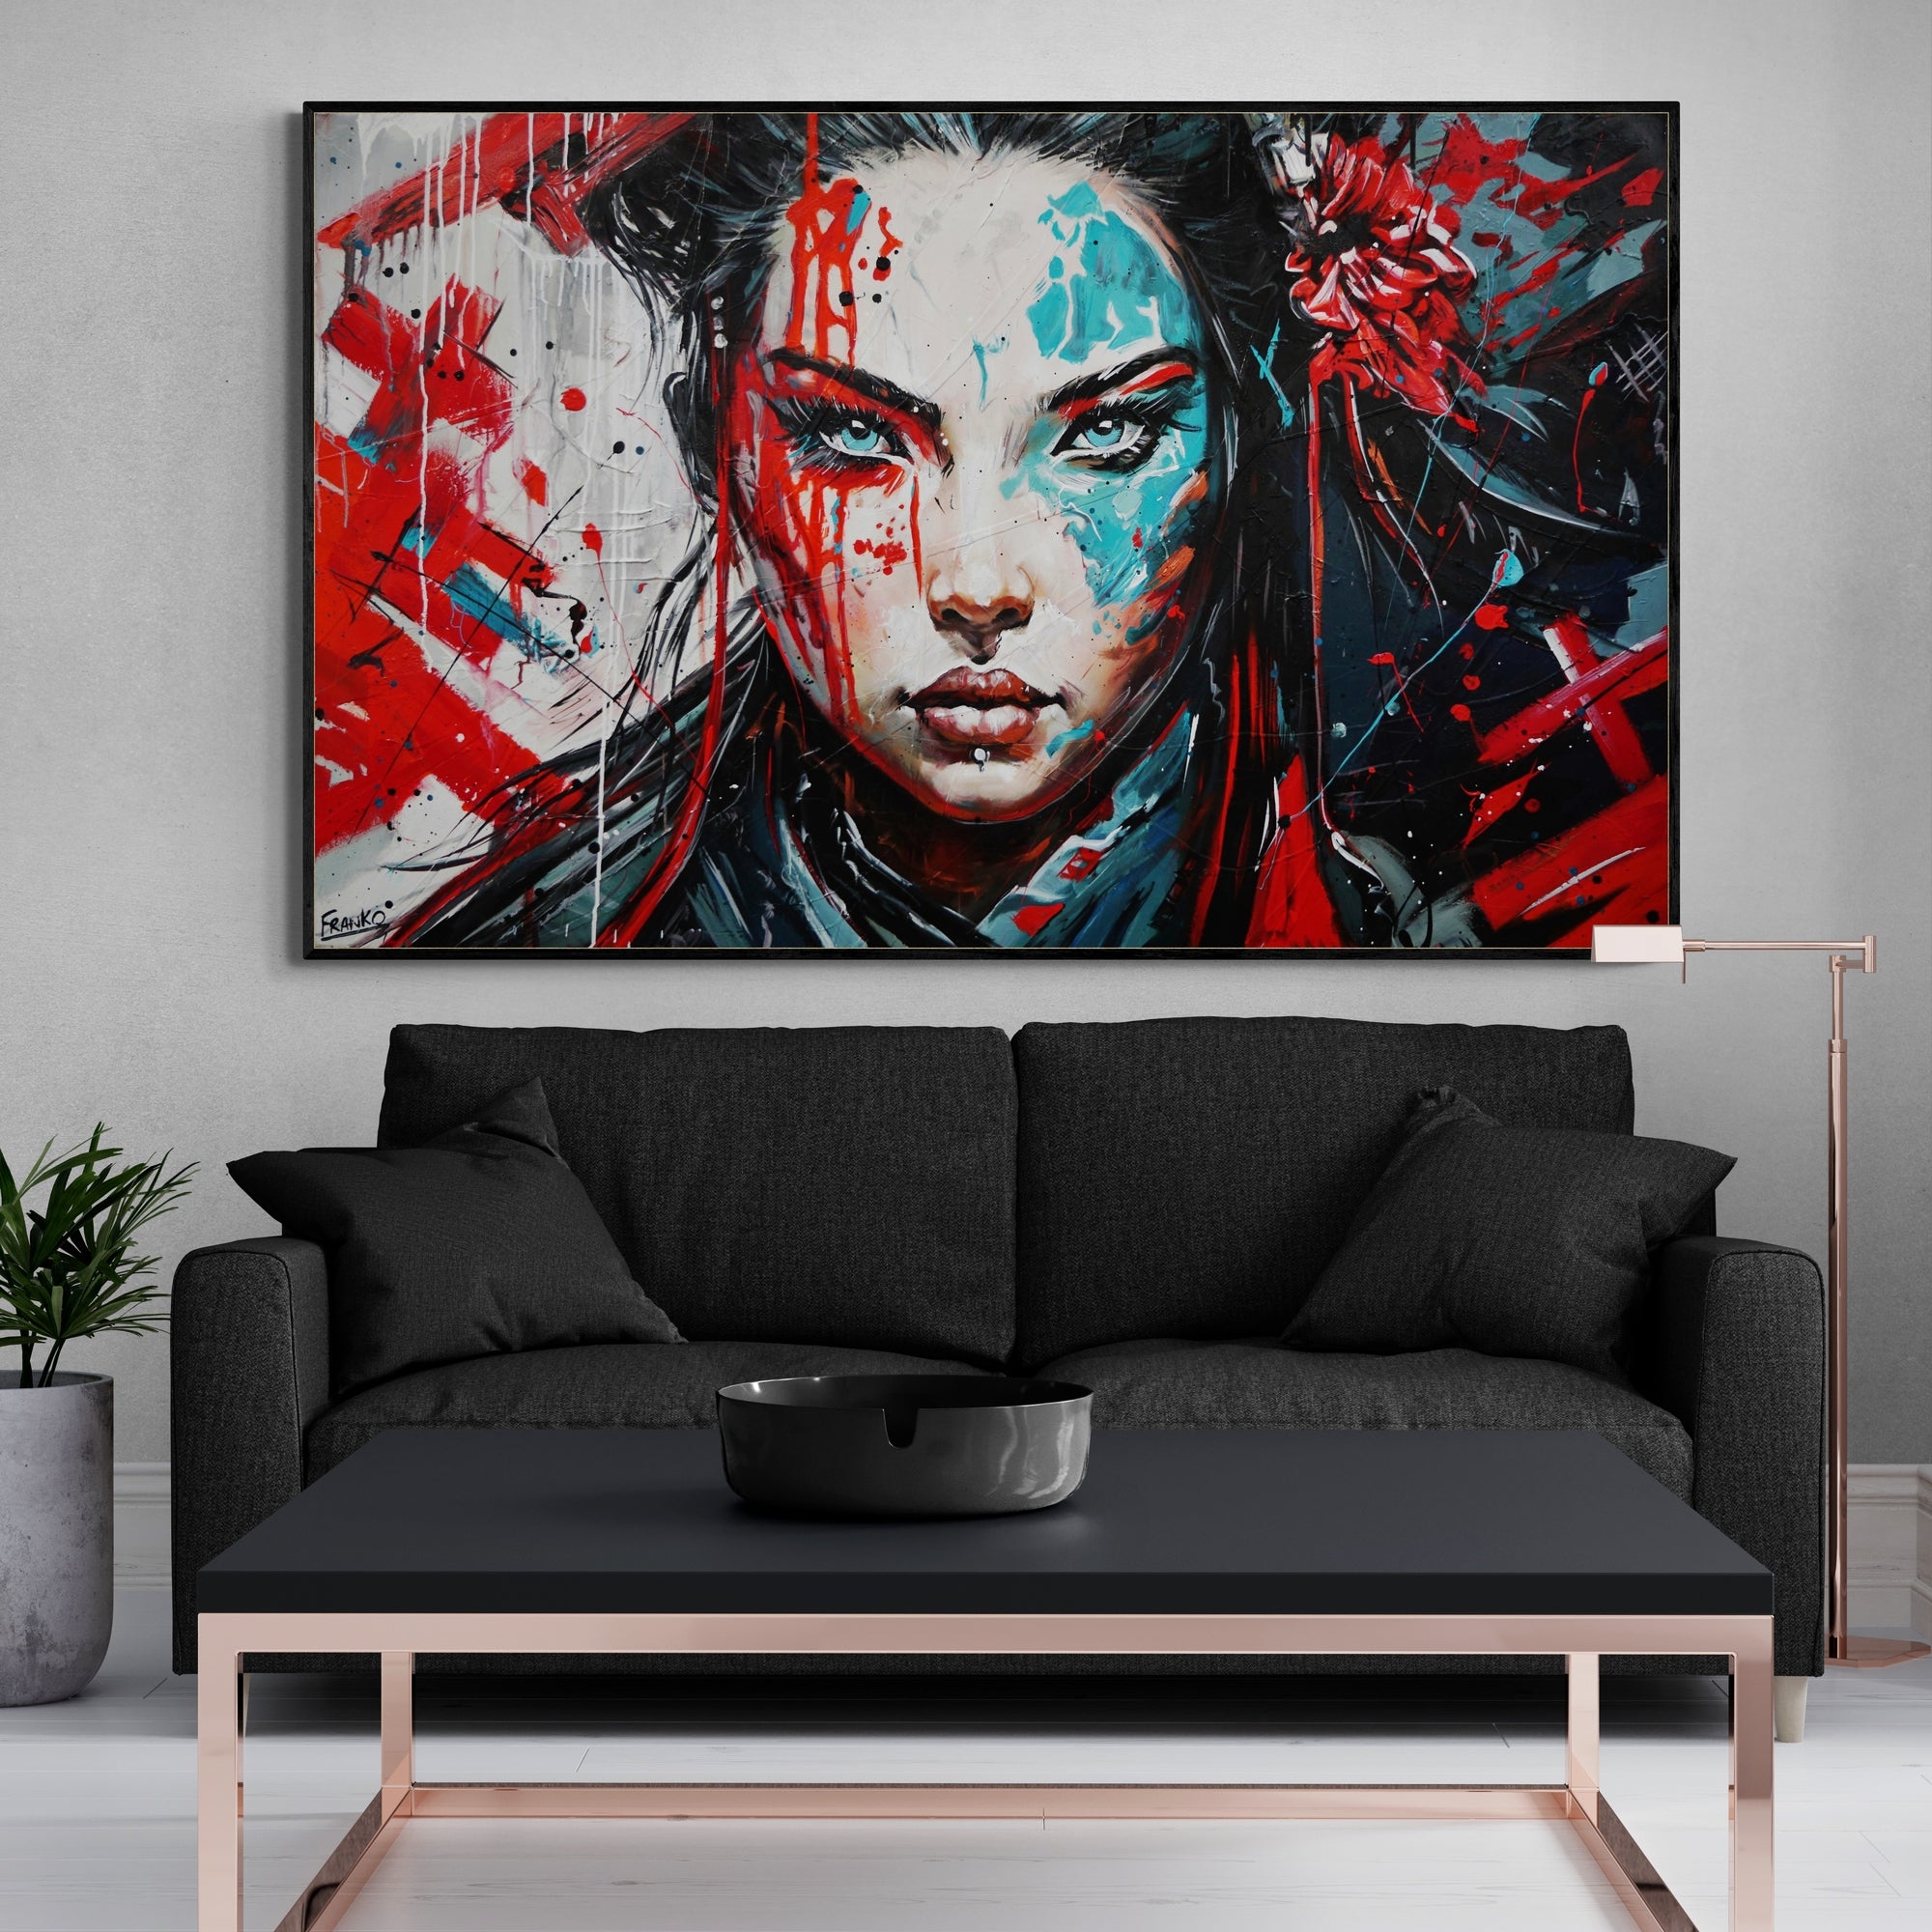 Nakano 160cm x 100cm "Brave and Beautiful" Abstract Realism Framed Textured Painting